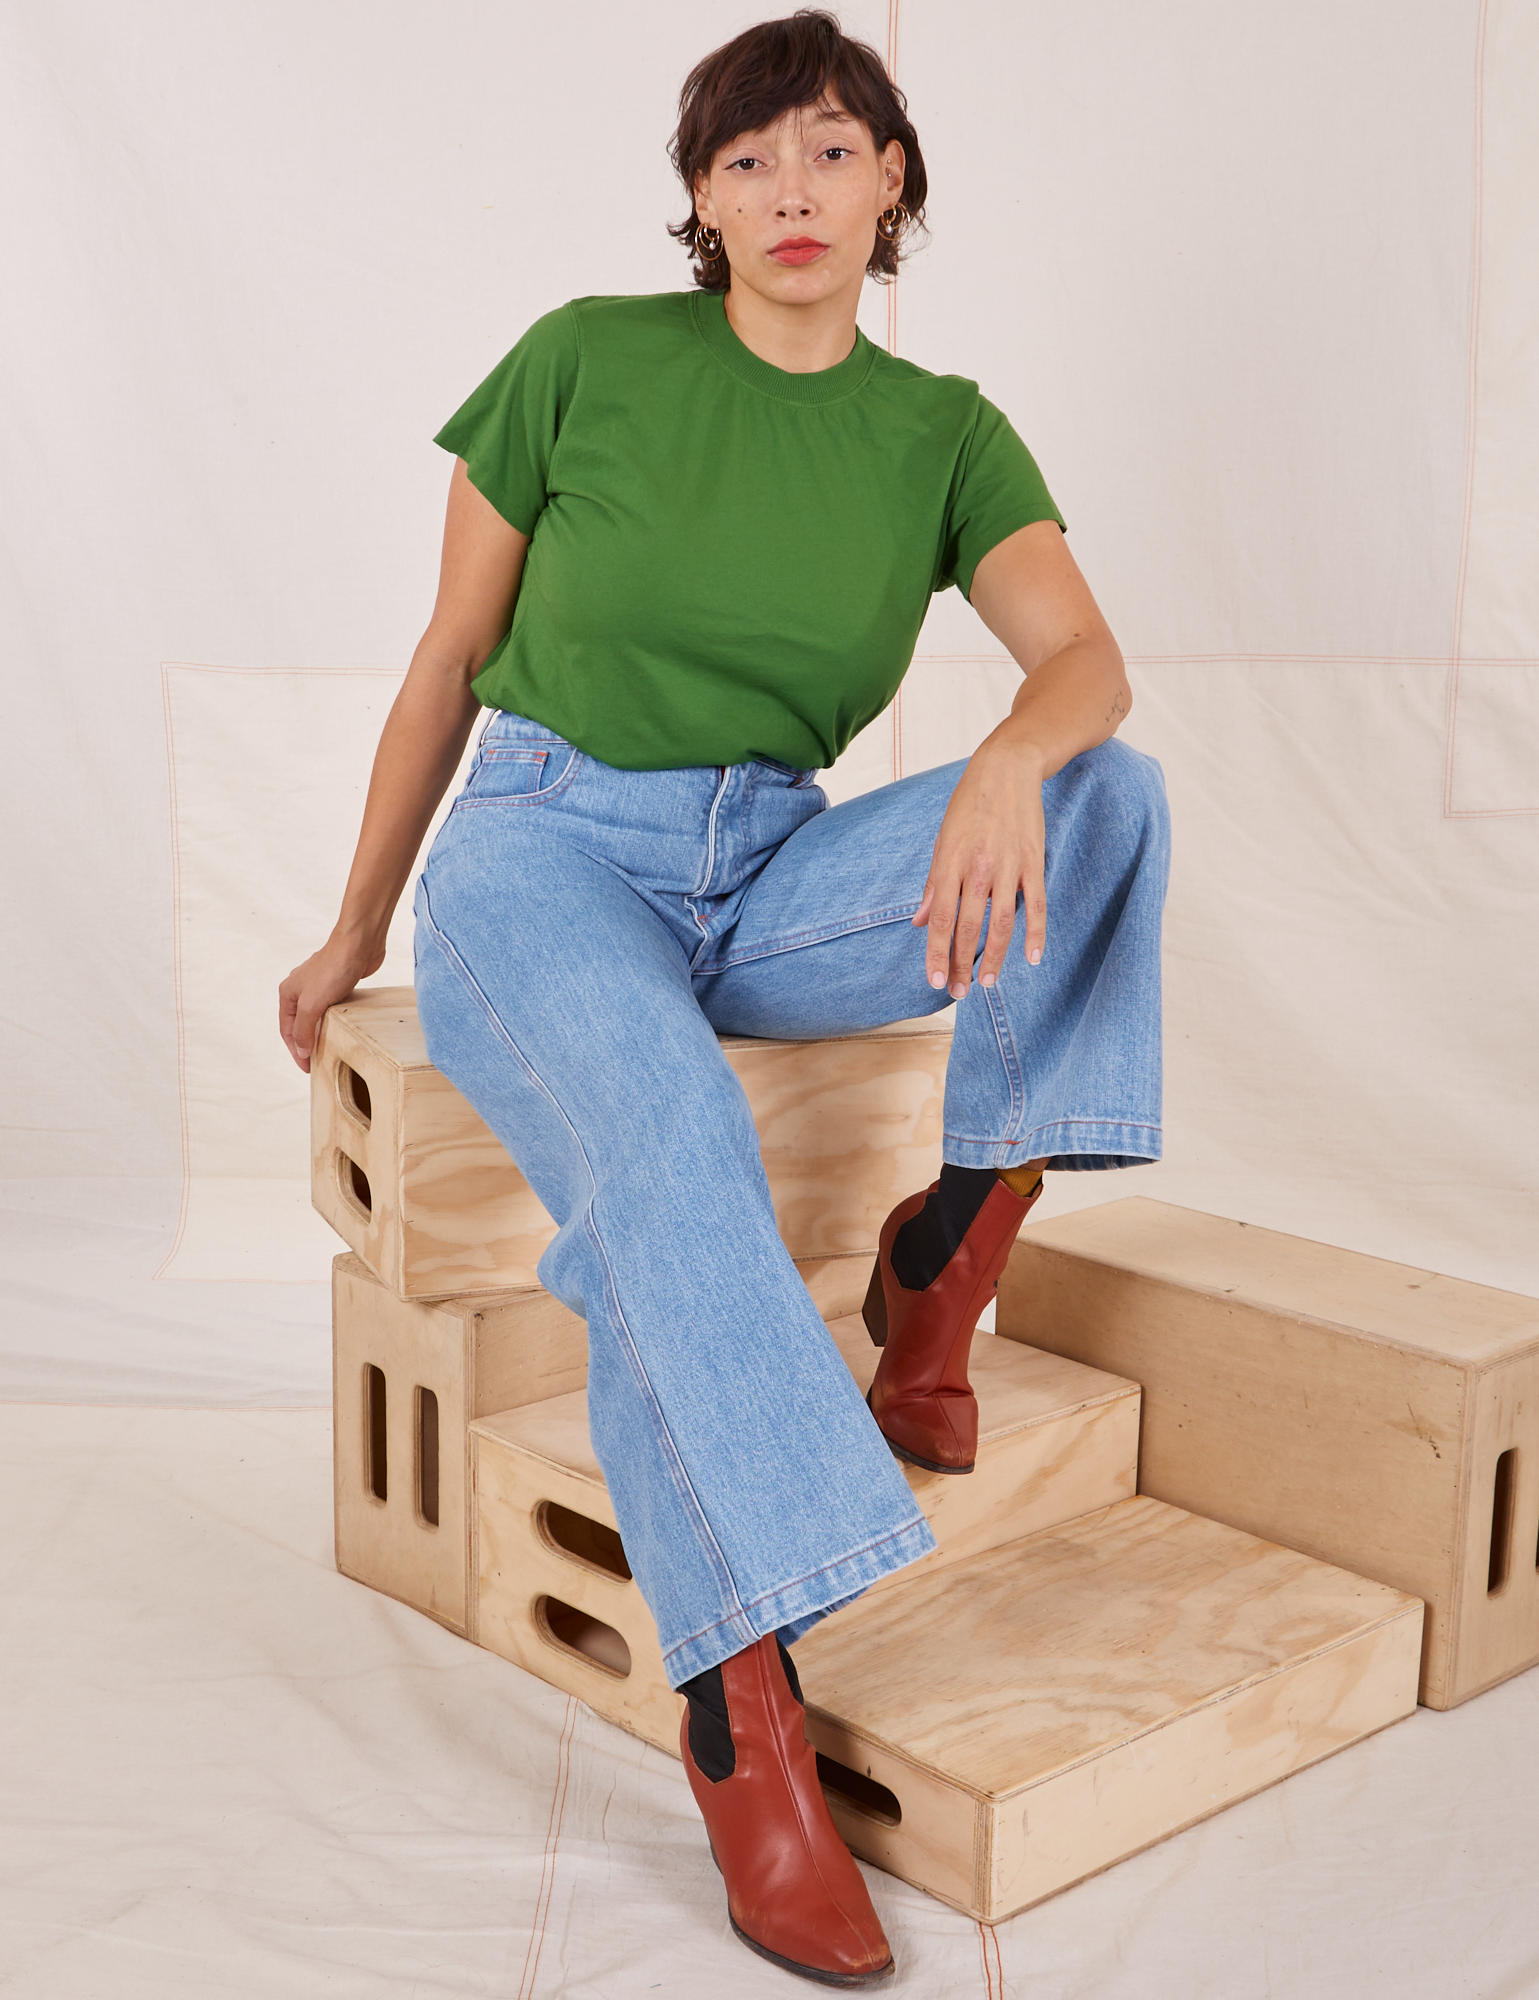 Tiara is wearing Organic Vintage Tee in Lawn Green and light wash Sailor Jeans